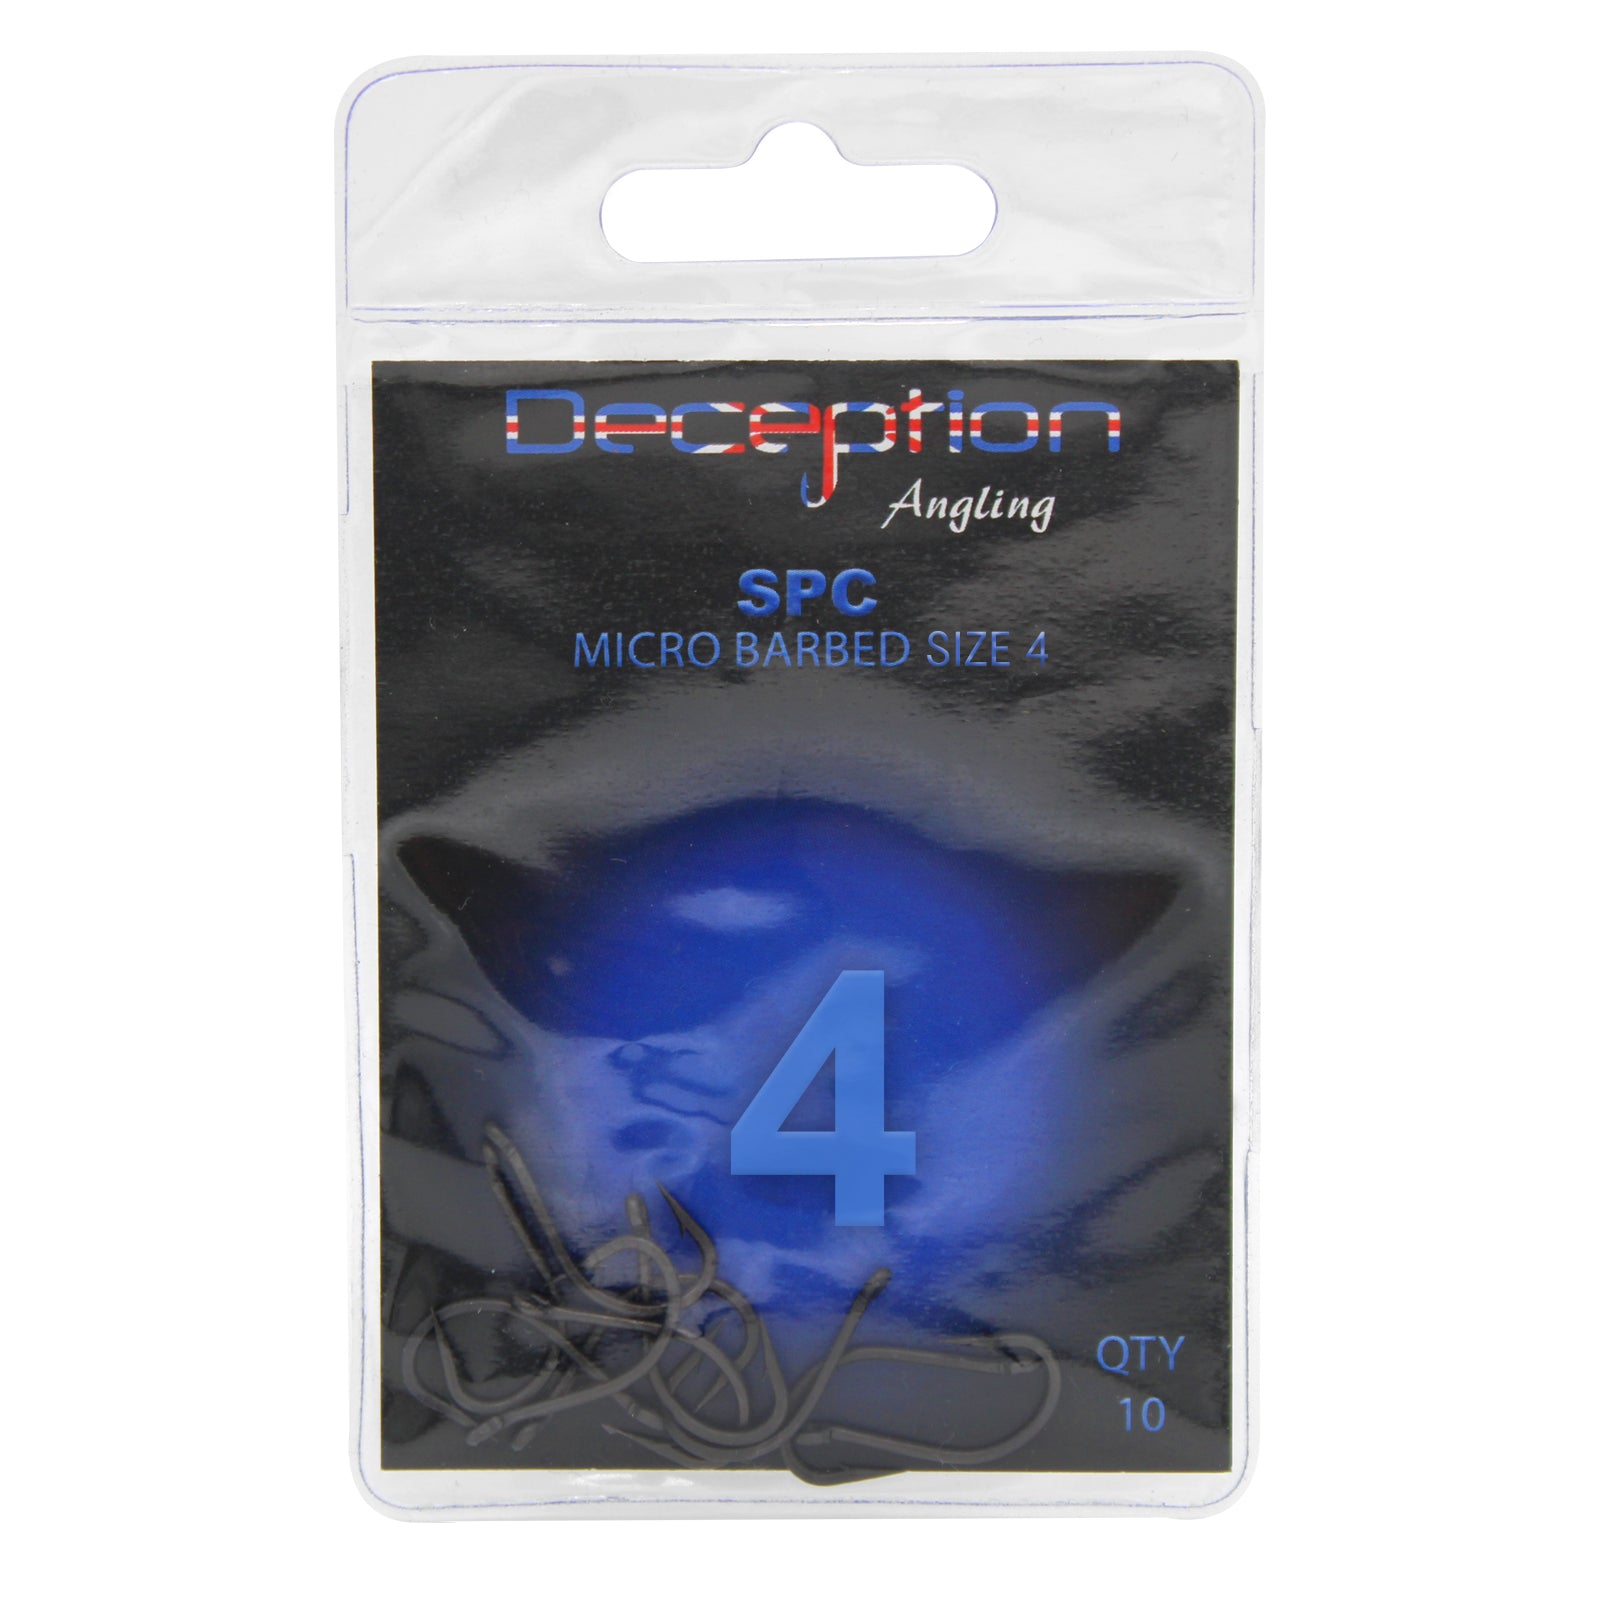 Deception Angling SPC Micro Barbed Pack of 10 Fishing Hooks Size 4